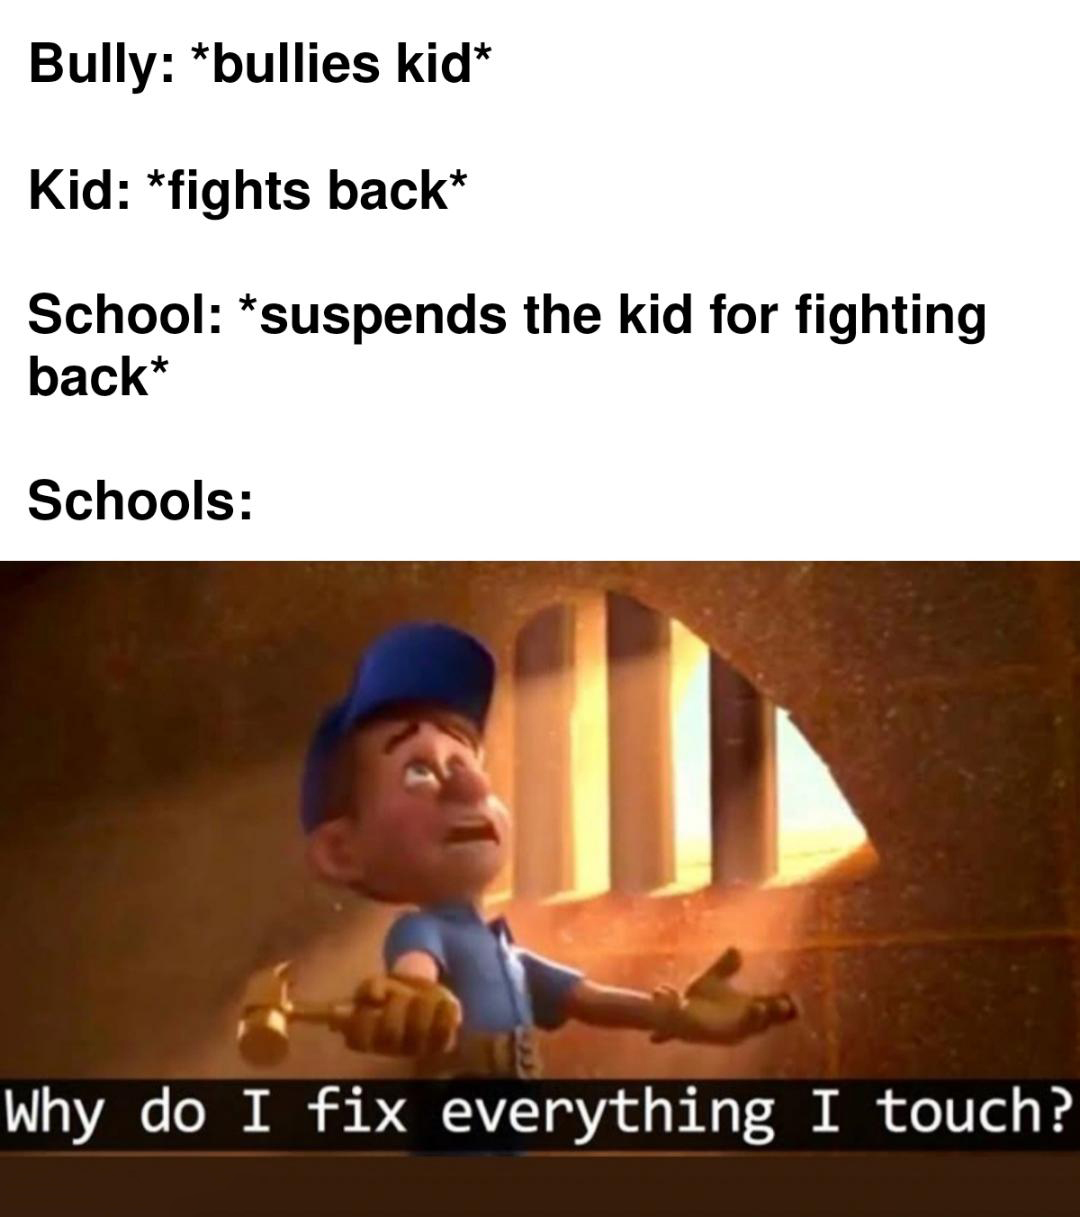 funny memes - phil swift memes - Bully bullies kid Kid fights back School suspends the kid for fighting back Schools Why do I fix everything I touch?